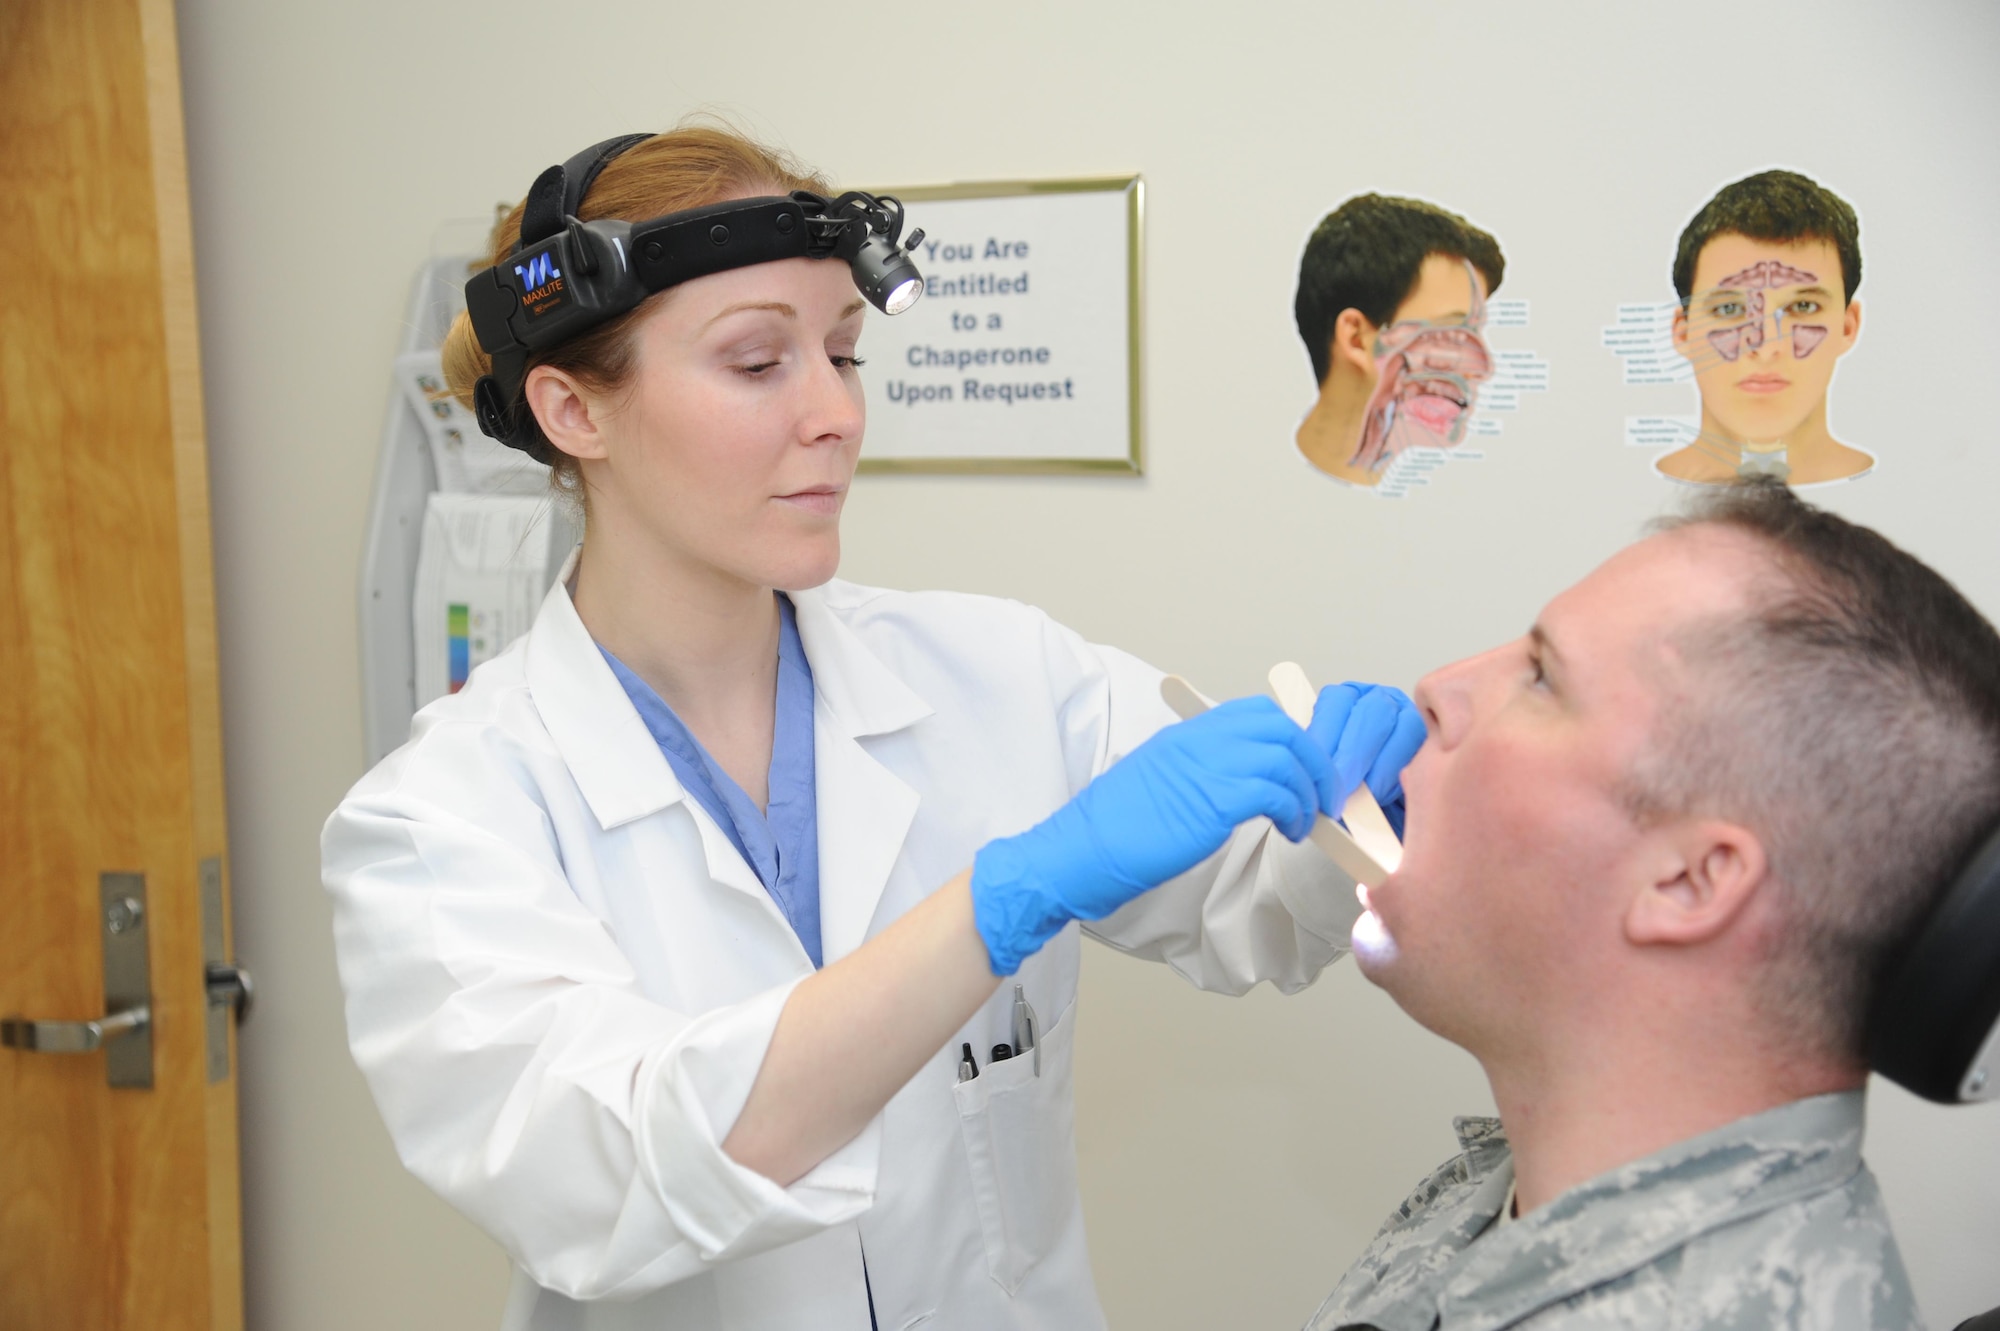 U.S. Air Force doctor (Maj.) Whitney Pafford, Chief, Head and Neck Surgery at Wright-Patterson Medical Center’s Department of Otolaryngology, checks a patient for irregularities or signs of cancer. The ENT clinic is hosting a walk-in head and neck cancer screening April 20, 2017 from 9 to 4. The screening for Active-duty military and Tricare beneficiaries will include an exam and information on different types of cancer and their symptoms. (U.S. Air Force photo/Tech Sgt. Scott Johnson)